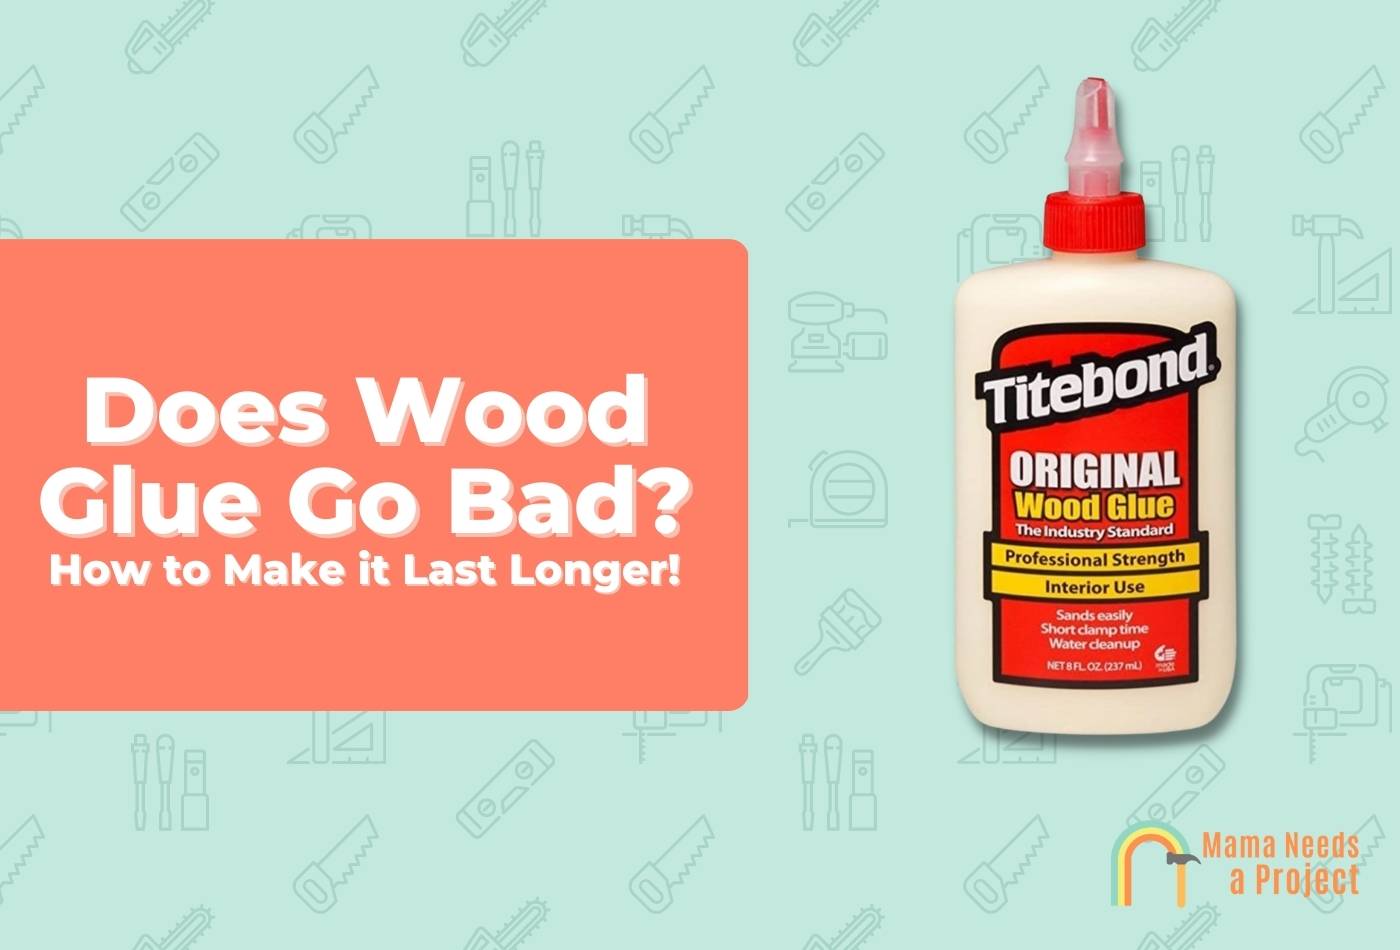 Does Wood Glue Go Bad or Expire